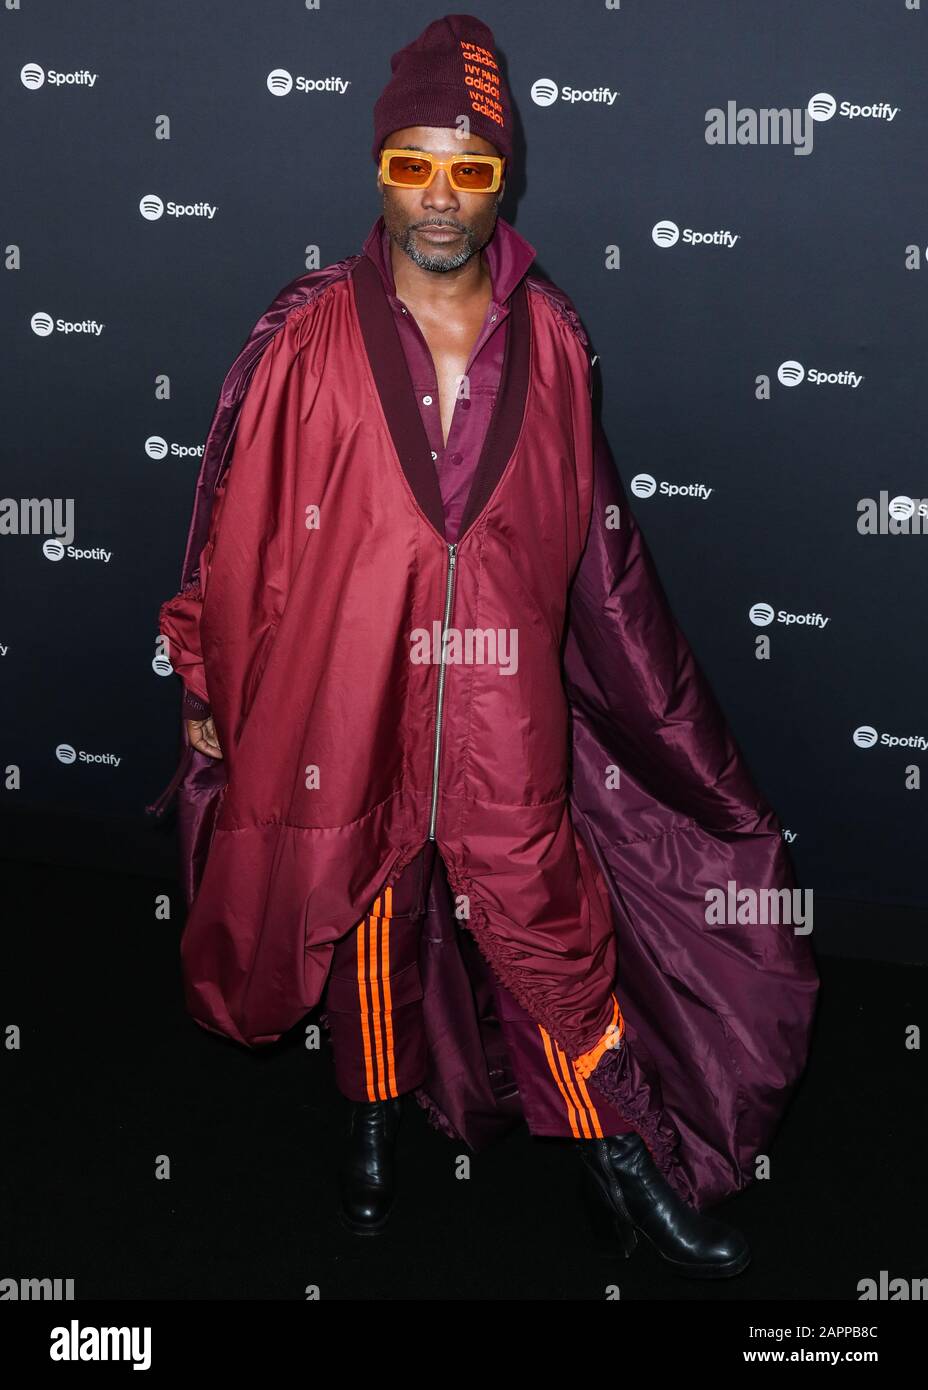 WEST HOLLYWOOD, LOS ANGELES, CALIFORNIA, USA - JANUARY 23: Billy Porter wearing Adidas x Ivy Park arrives at the Spotify Best New Artist 2020 Party held at The Lot Studios on January 23, 2020 in West Hollywood, Los Angeles, California, United States. (Photo by Xavier Collin/Image Press Agency) Stock Photo